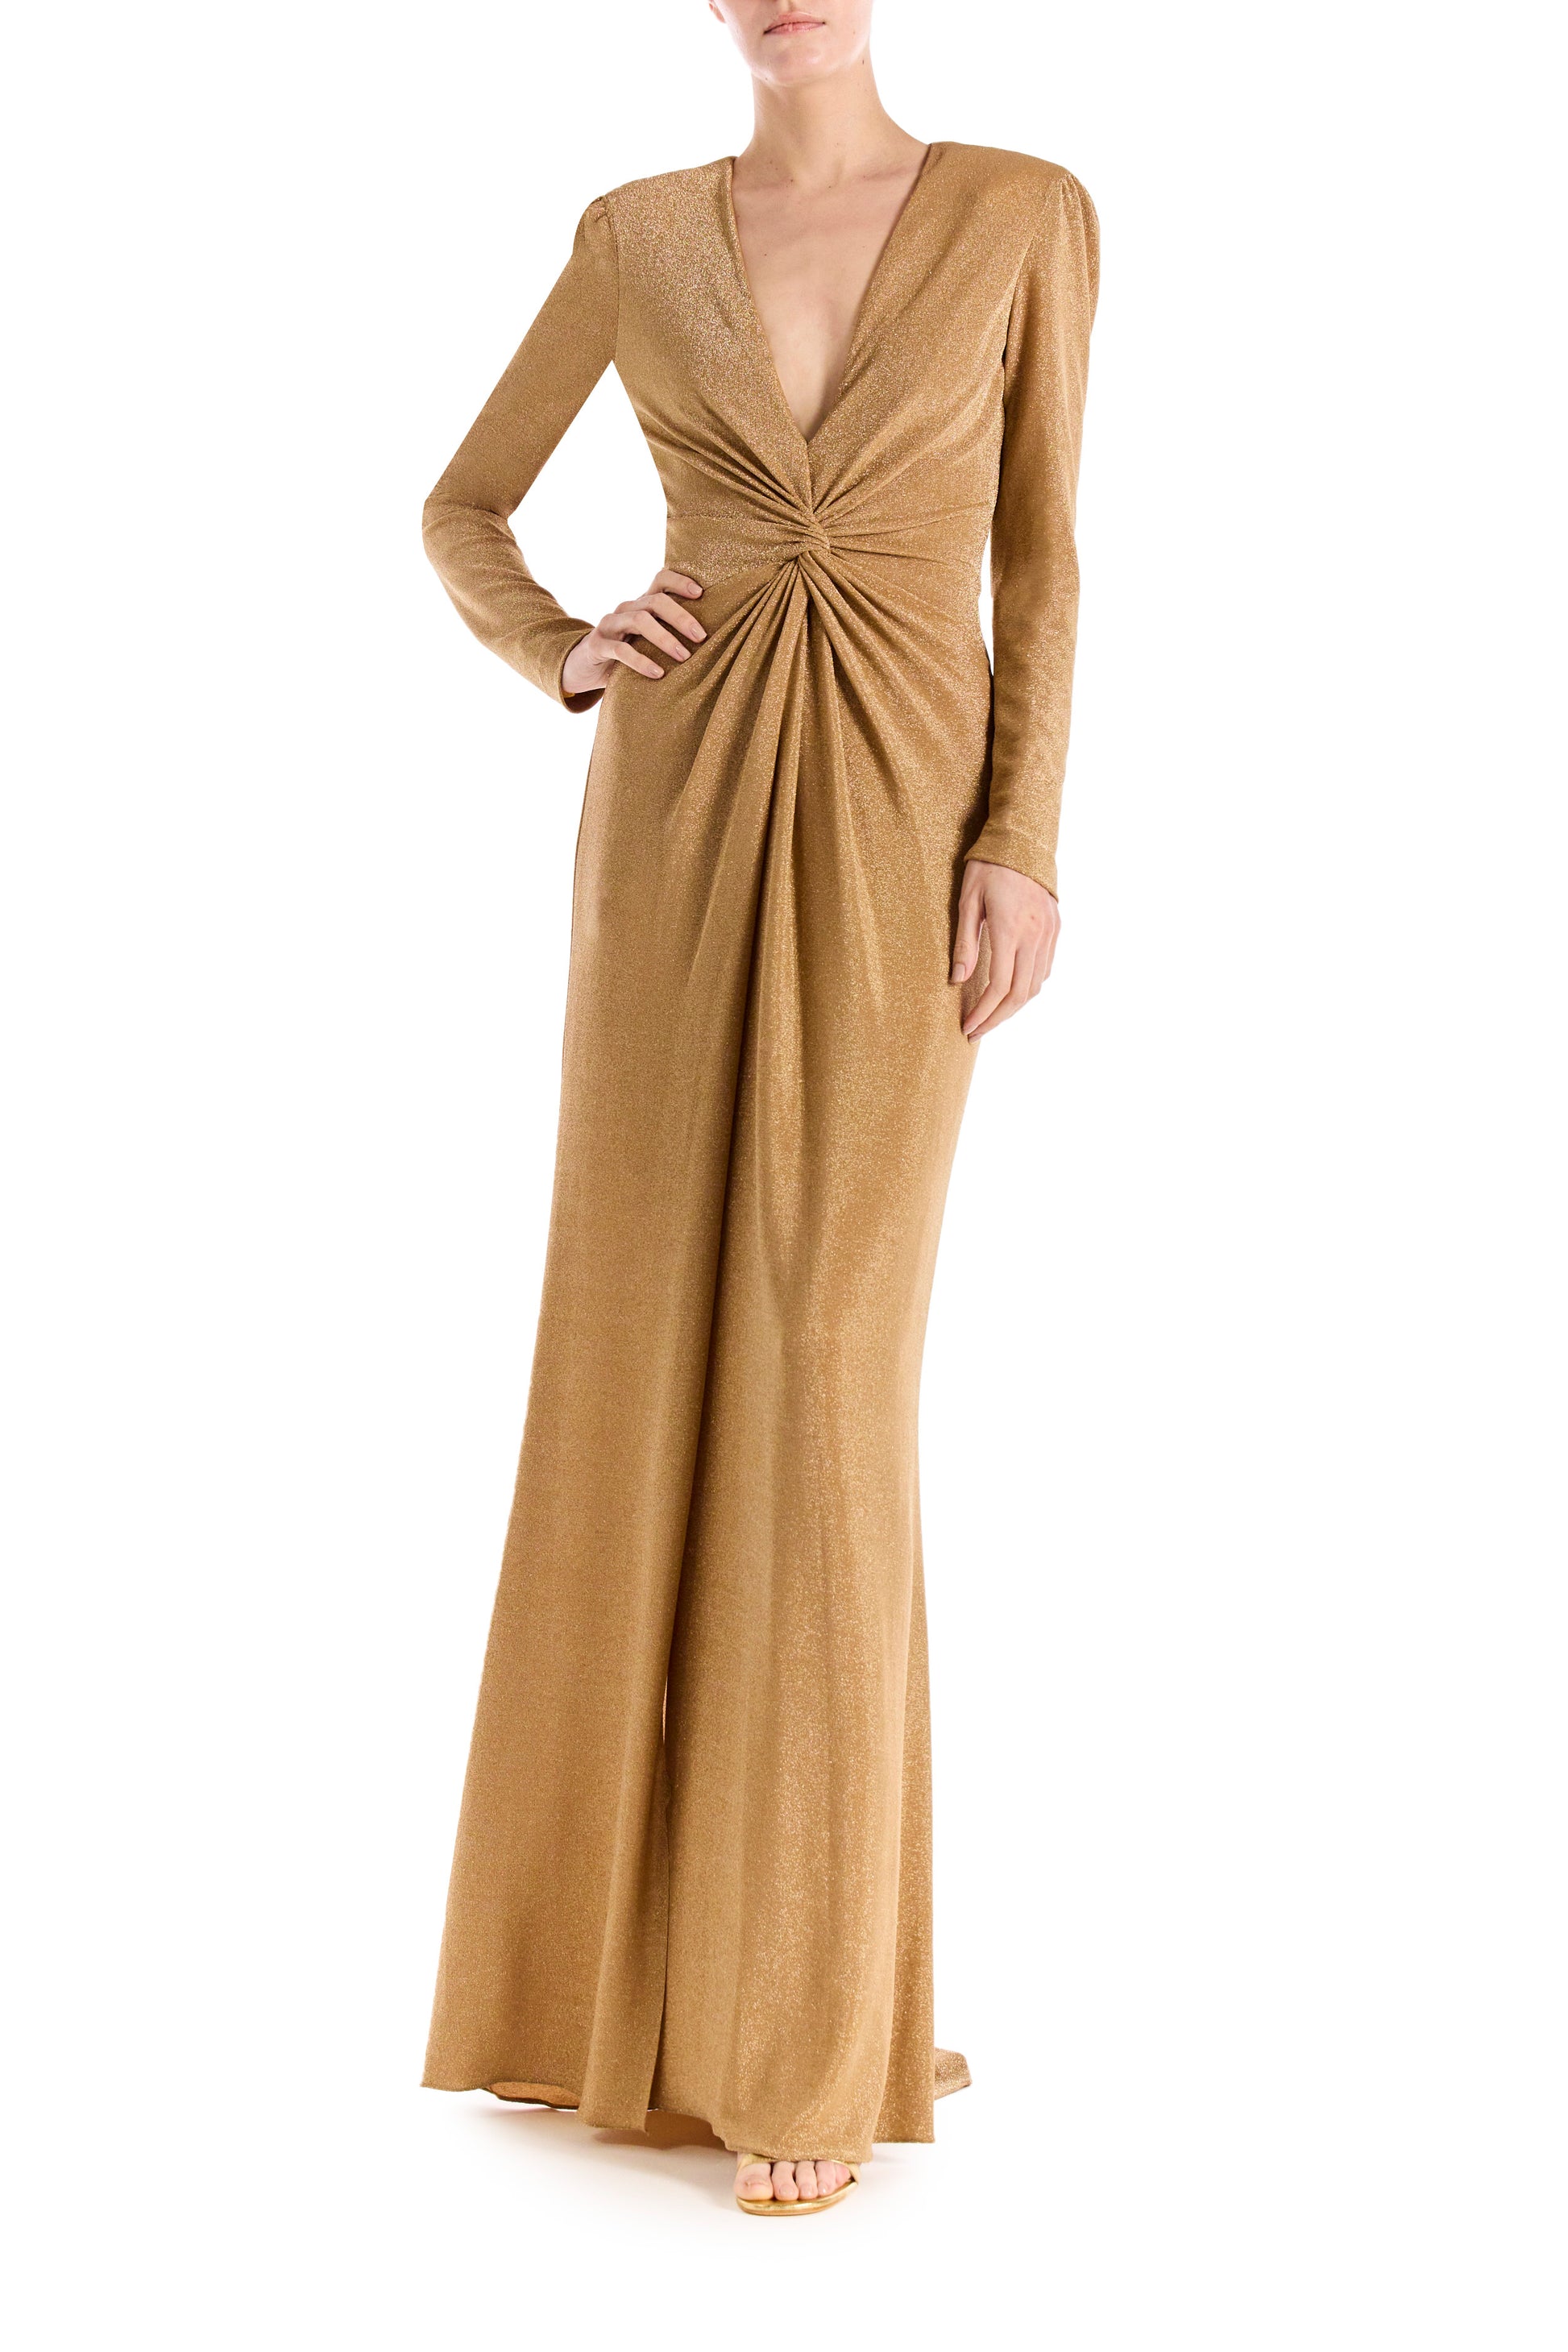 Antique Gold glitter knit dress with long sleeves and deep vneck.